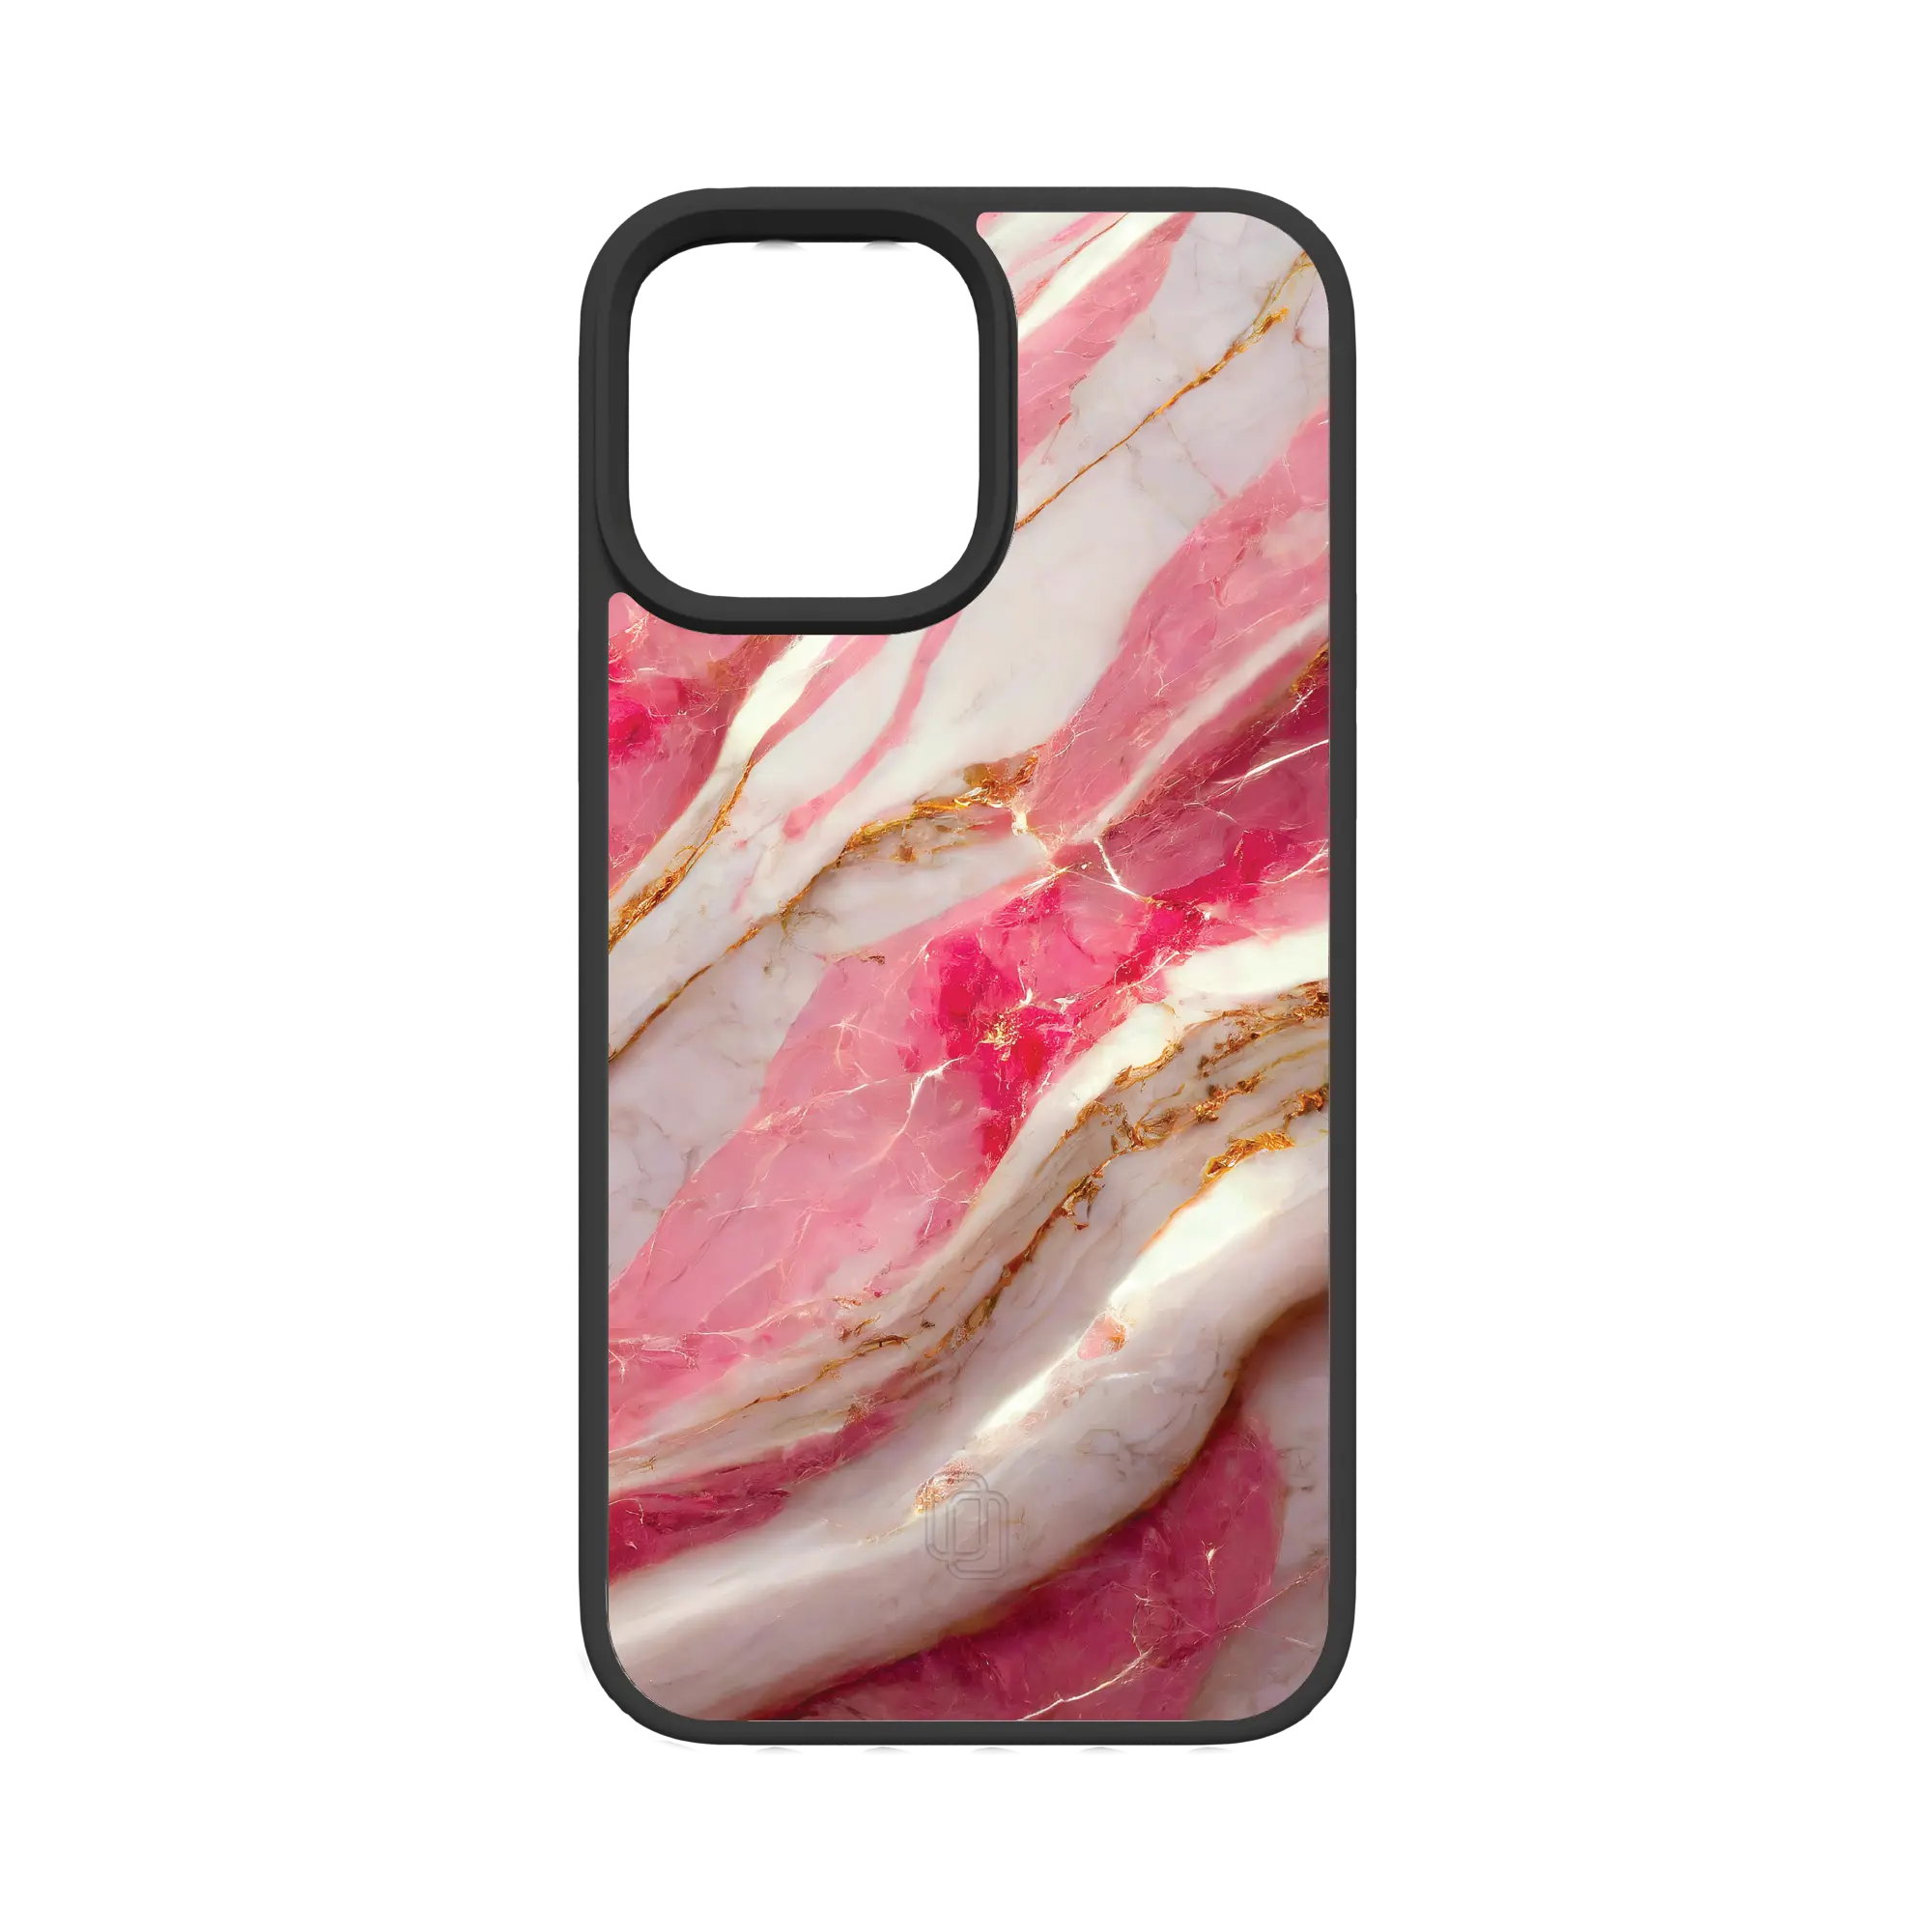 Apple-iPhone-13-Pro-Max-Crystal-Clear New Dawn | Protective MagSafe Pink Marble Case | Marble Stone Collection for Apple iPhone 13 Series cellhelmet cellhelmet